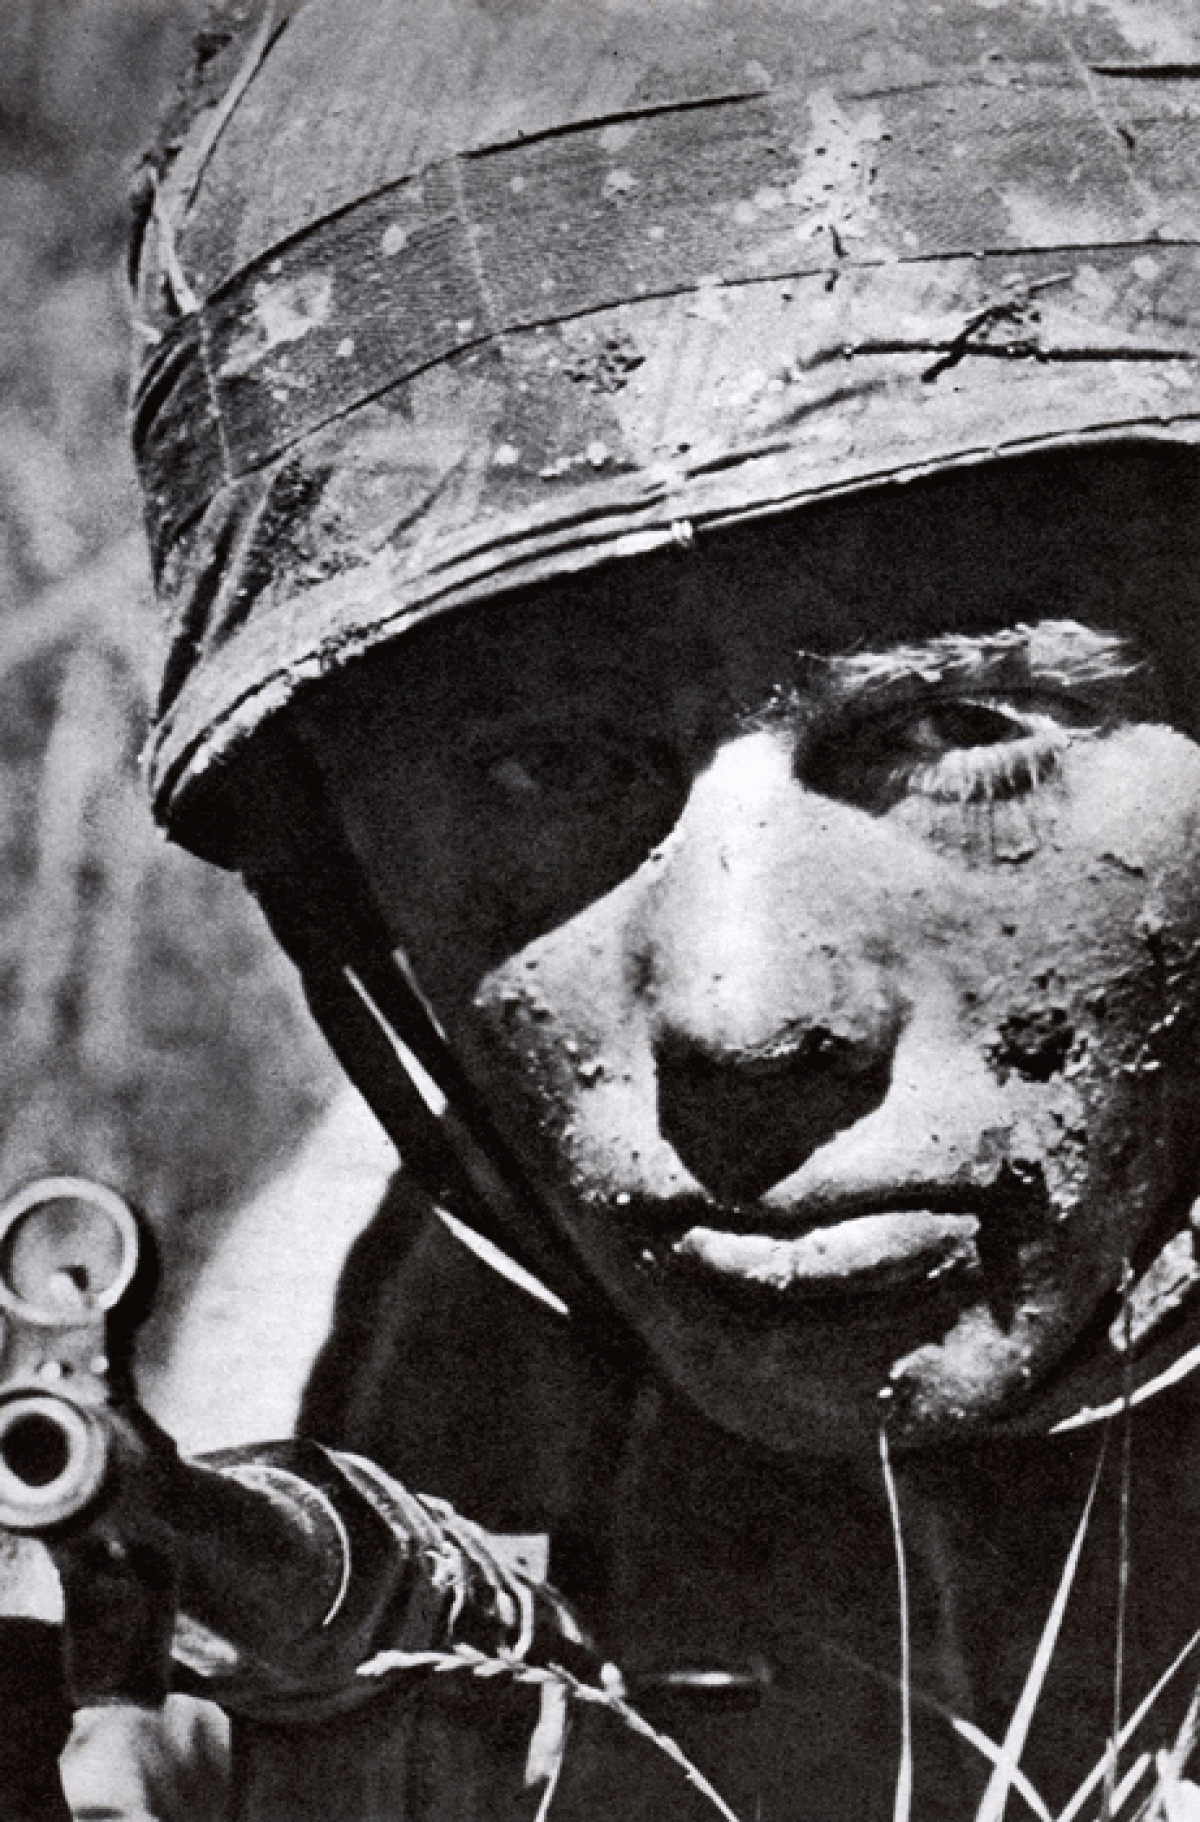 A Fallschirmjager german paratrooper face covered with mud and grime, Crete, 1941